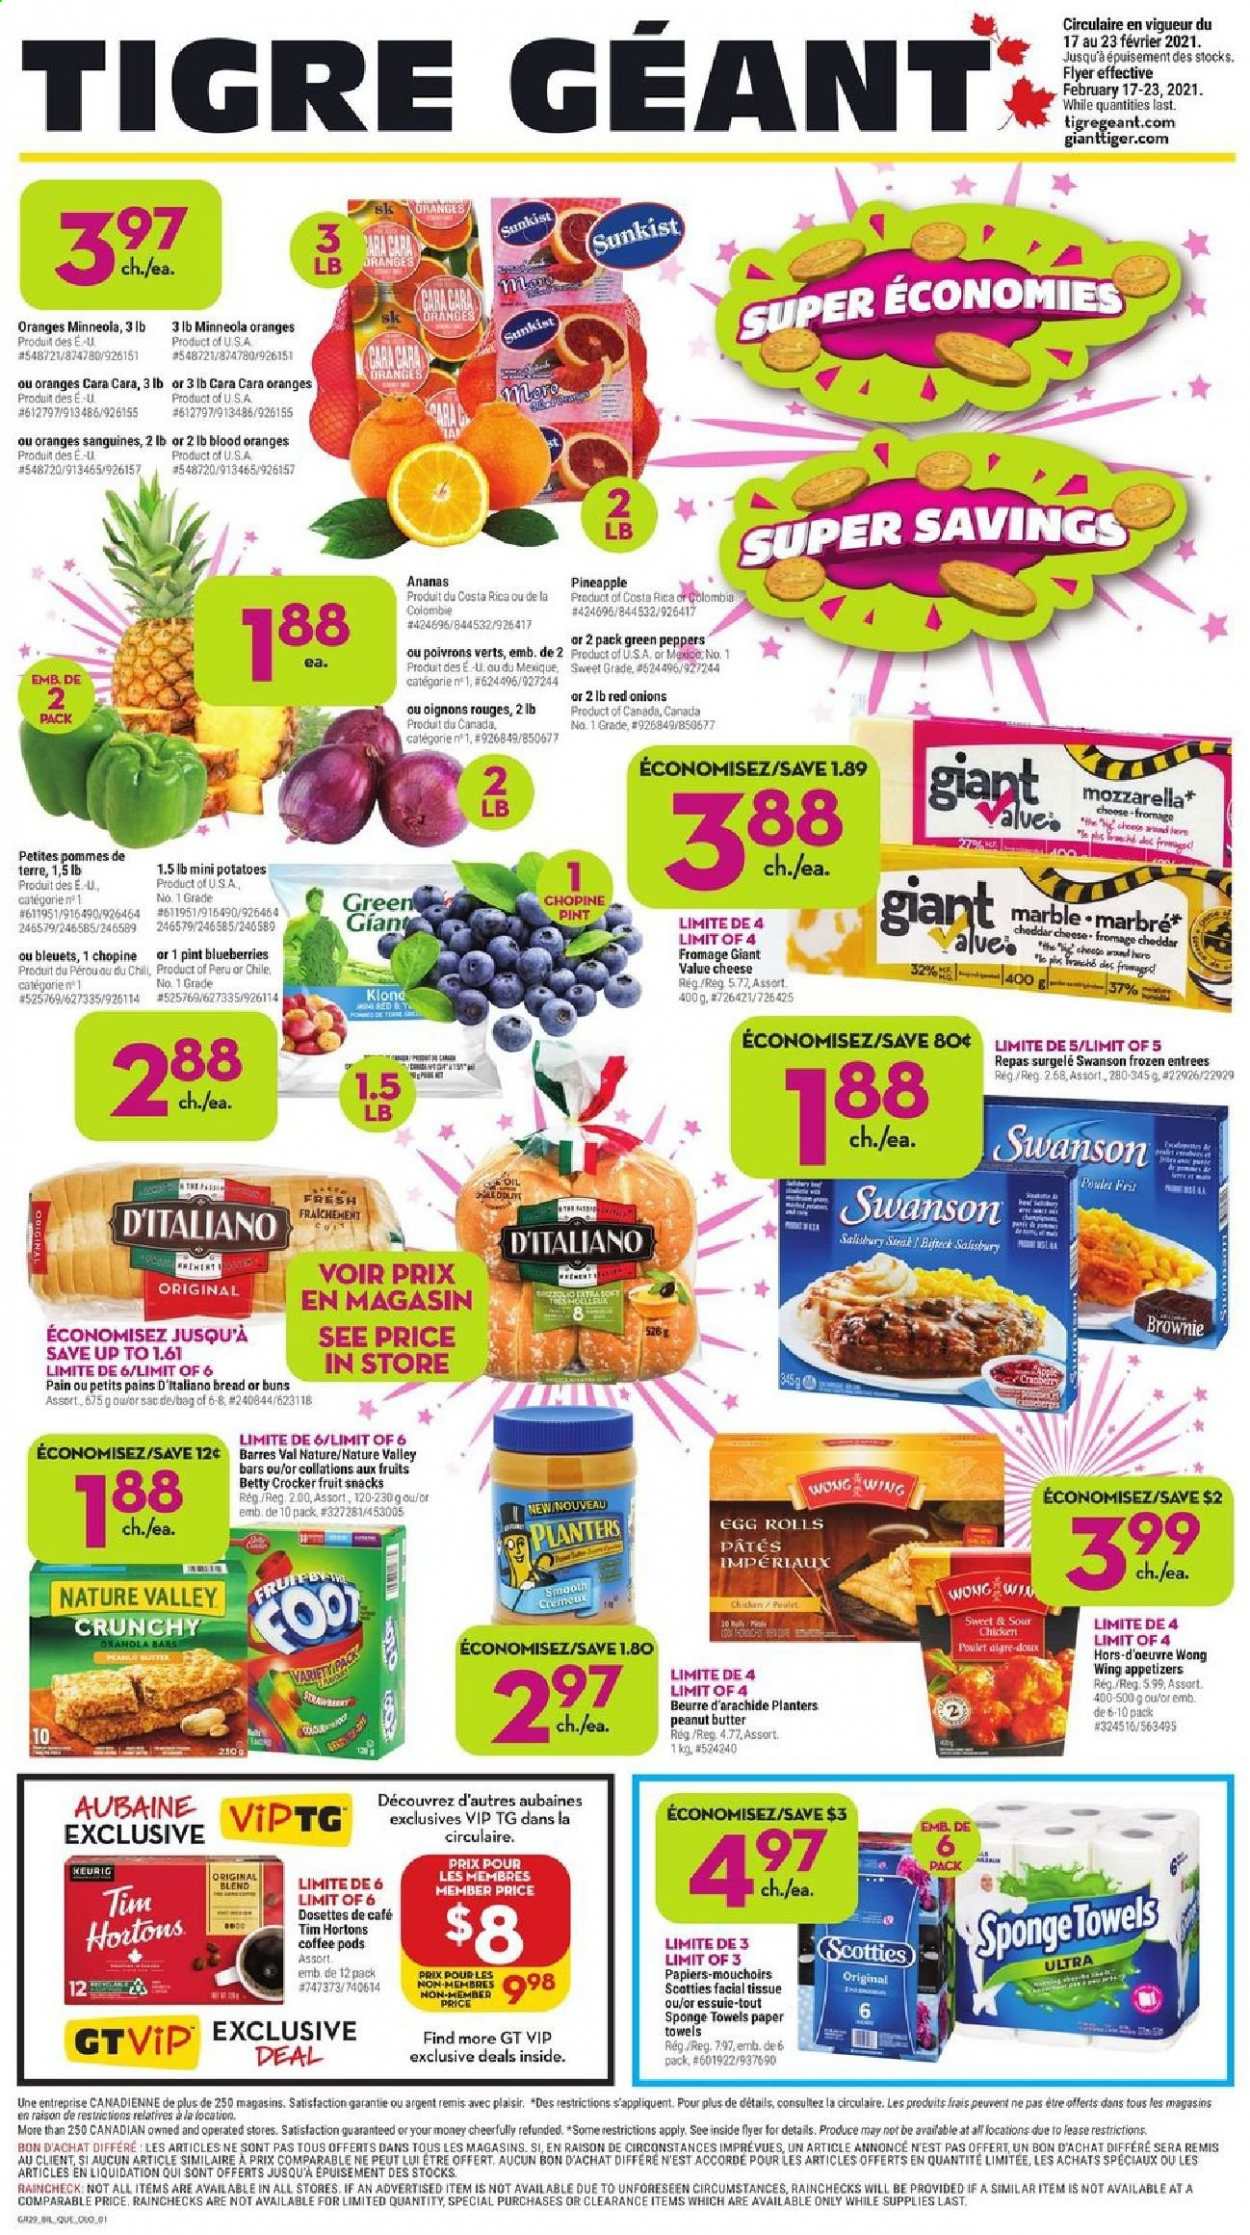 thumbnail - Giant Tiger Flyer - February 17, 2021 - February 23, 2021 - Sales products - bread, buns, brownies, red onions, potatoes, onion, peppers, blueberries, pineapple, egg rolls, cheddar, cheese, fruit snack, Nature Valley, oil, peanut butter, Planters, coffee pods, Keurig, tissues, kitchen towels, paper towels, sponge, steak. Page 1.